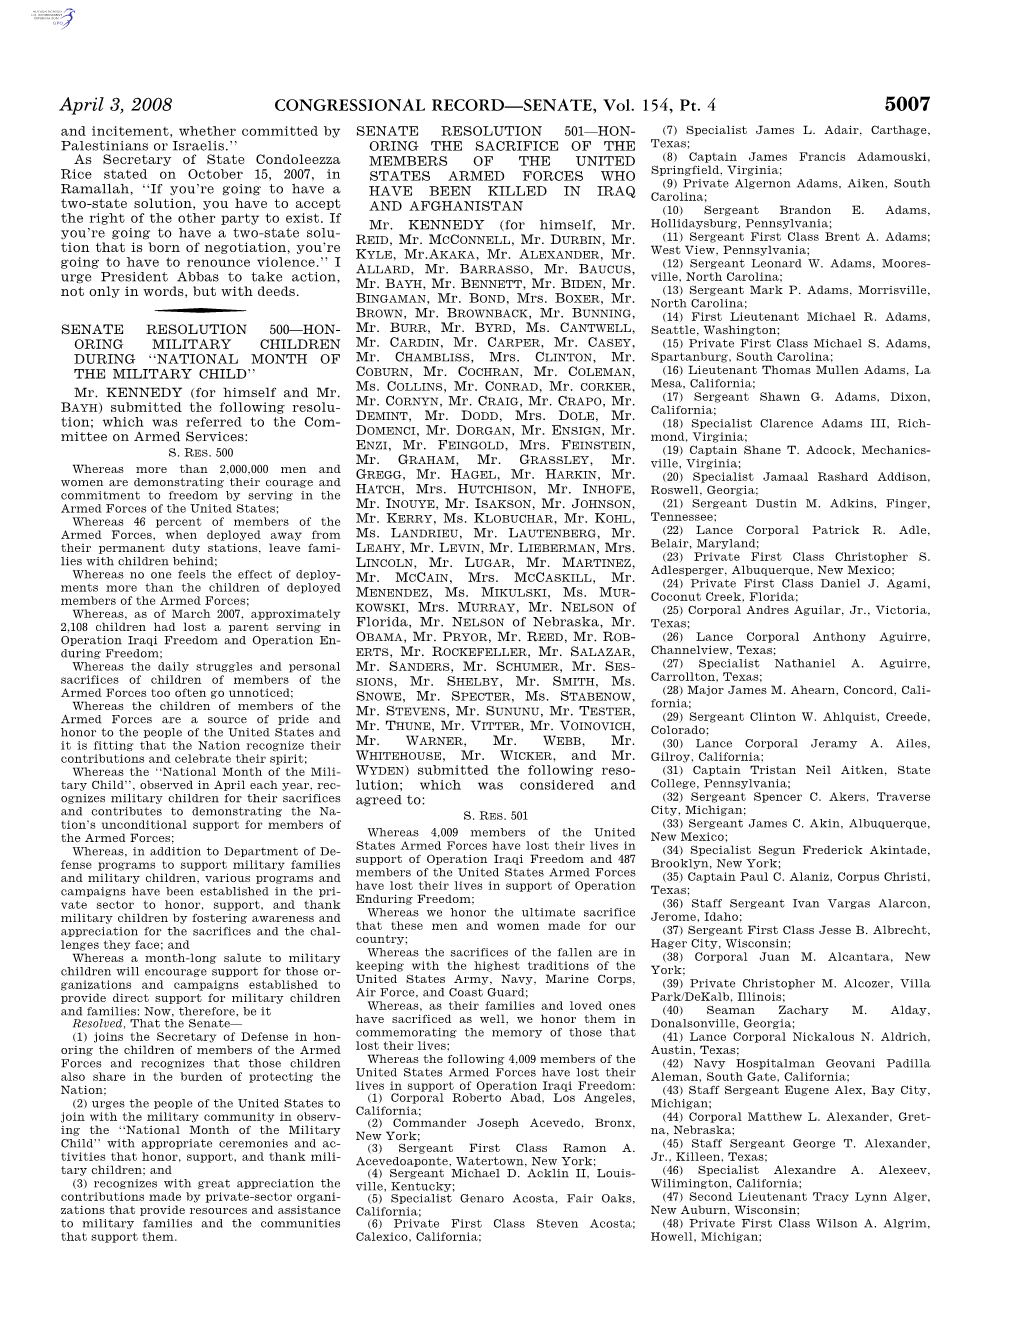 CONGRESSIONAL RECORD—SENATE, Vol. 154, Pt. 4 5007 and Incitement, Whether Committed by SENATE RESOLUTION 501—HON- (7) Specialist James L